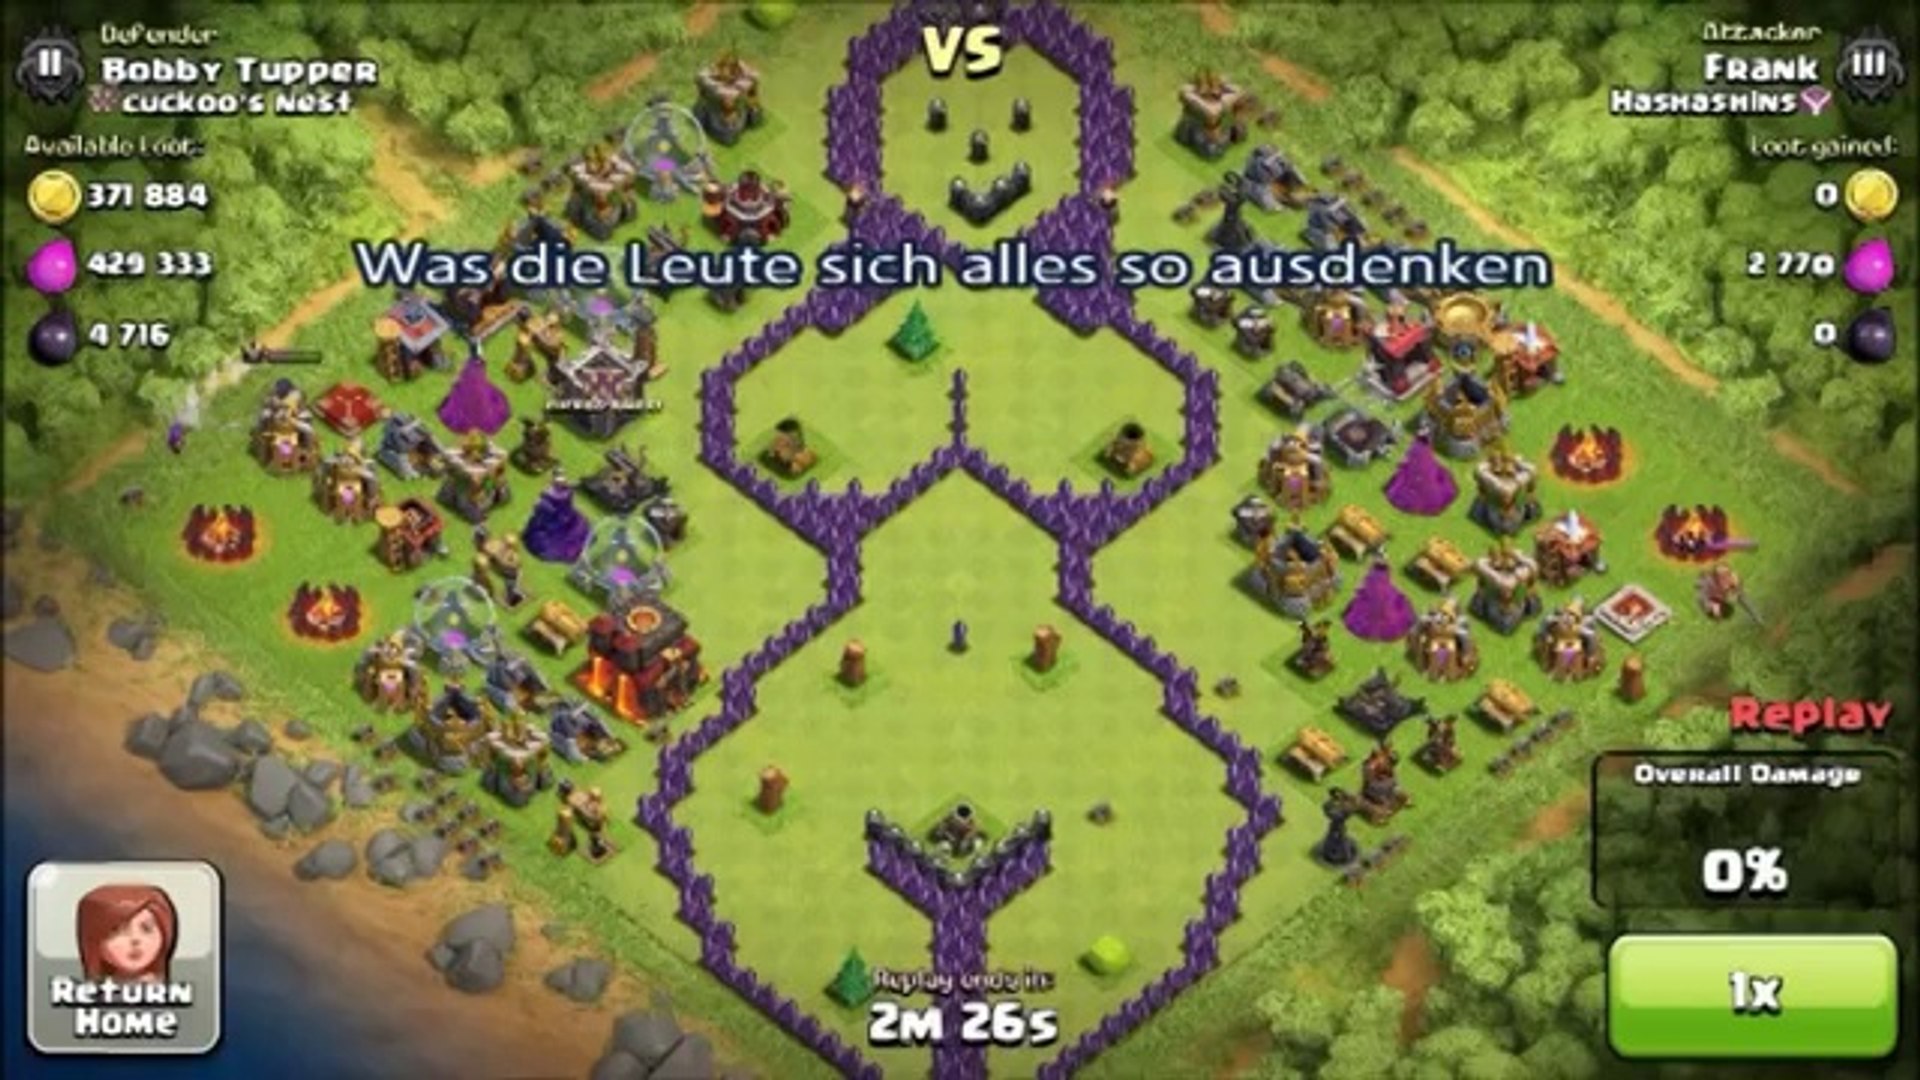 Clash of Clans Funny Base Design #21 SEXY COC (Ger) - Dailymotion Video